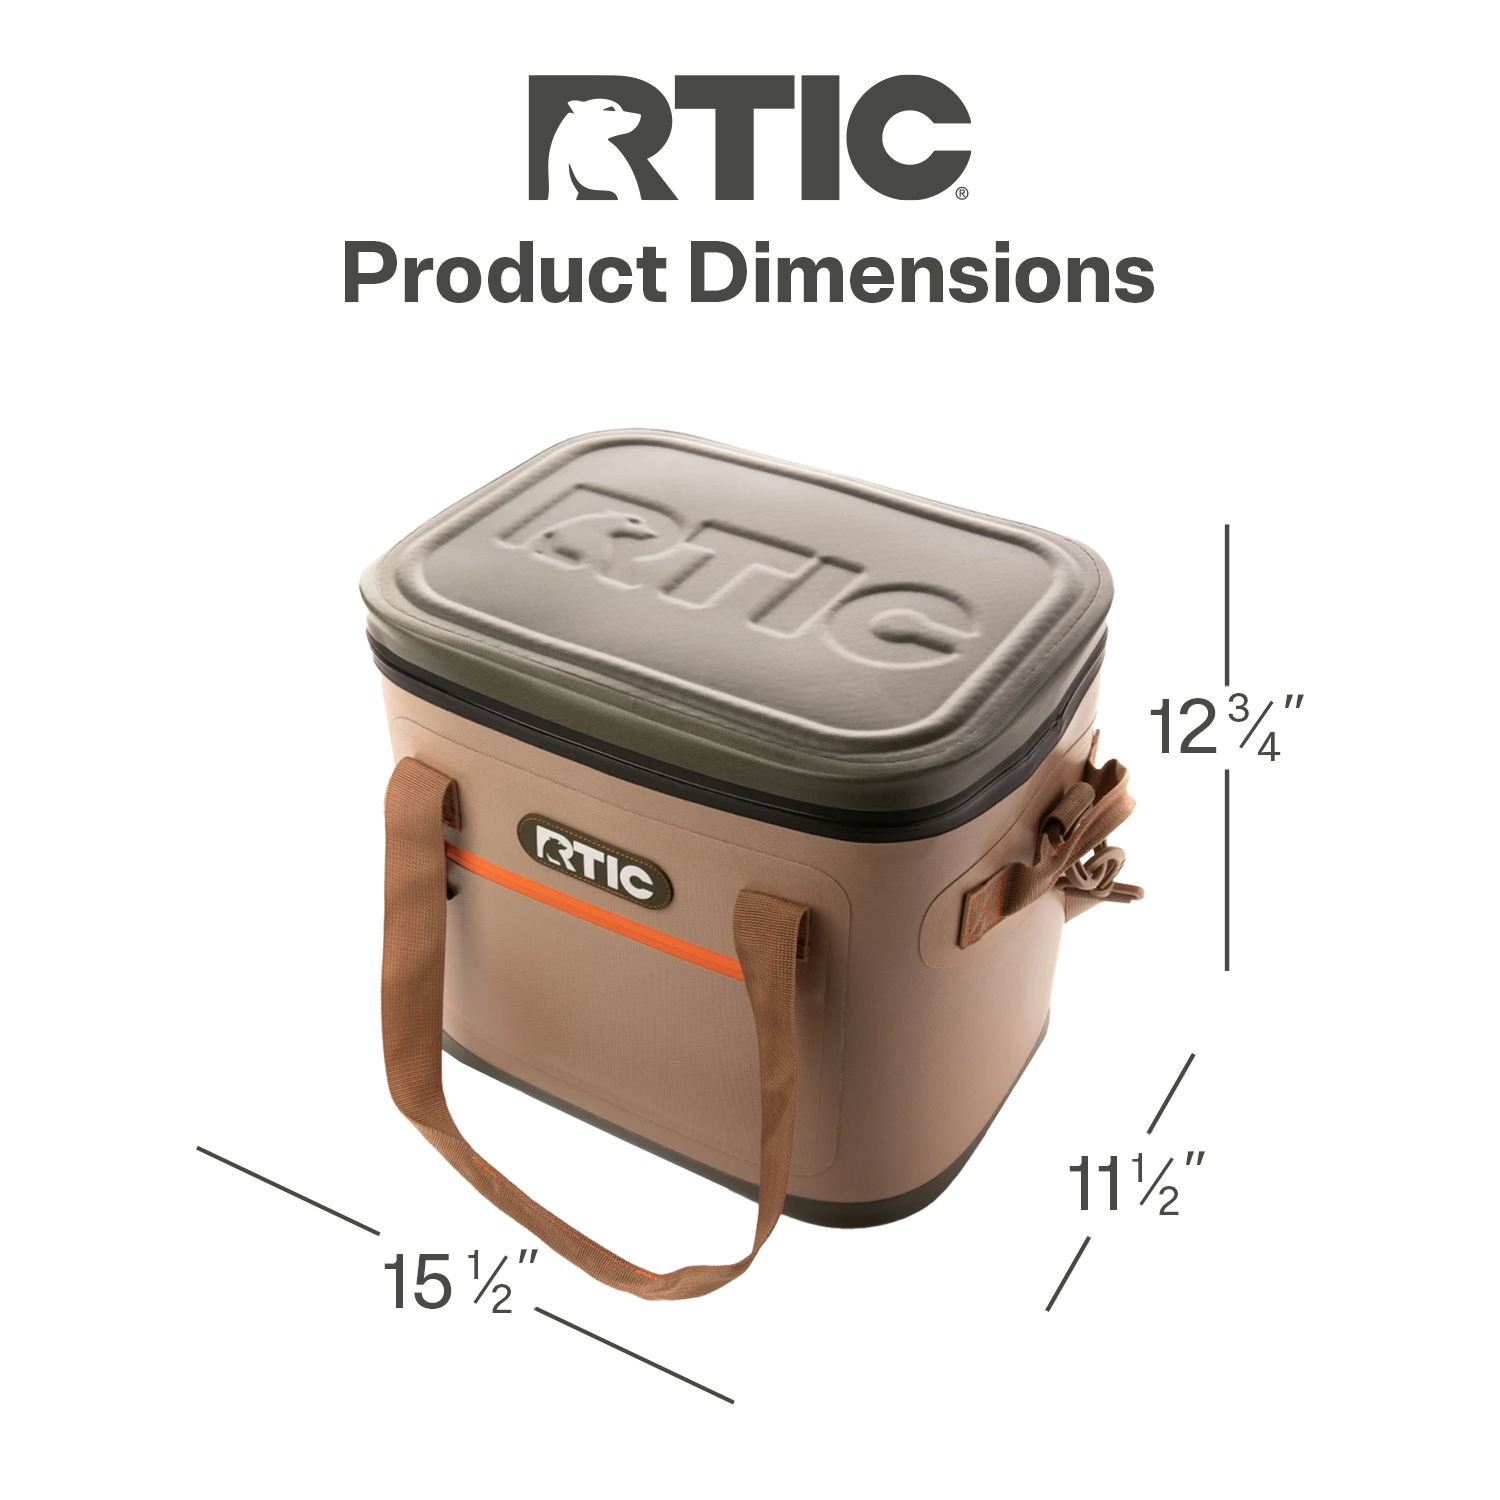 RTIC 30 Can Soft Pack Cooler, Leakproof Ice Chest Cooler with Waterproof Zipper, Tan - image 4 of 11